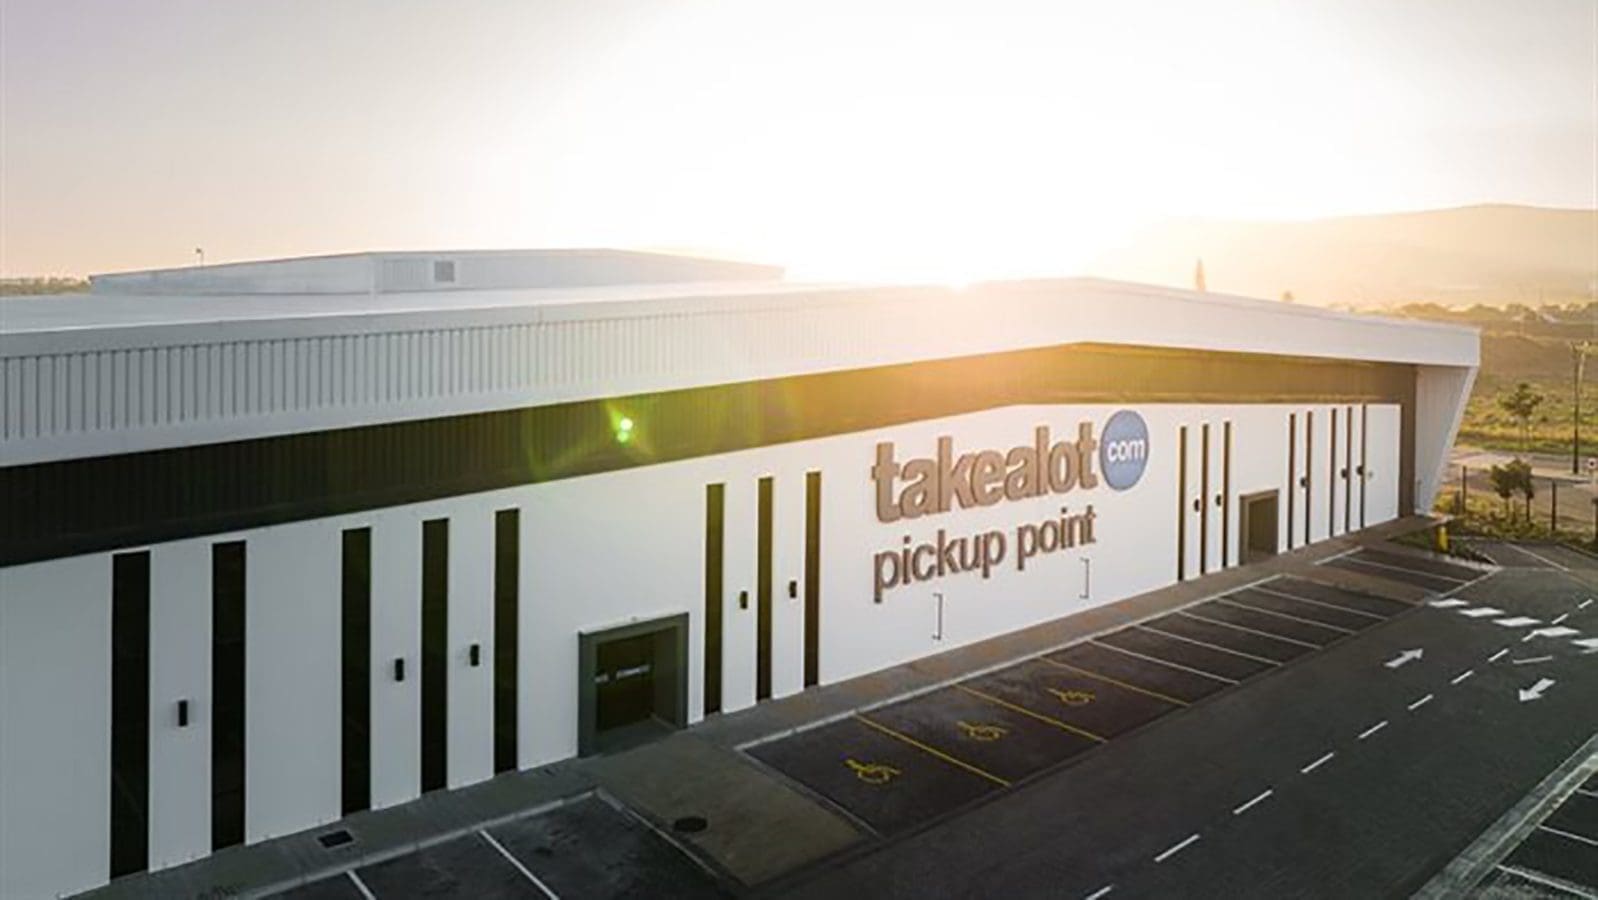 Takealot opens state-of-the-art distribution center fashioned with modern technology